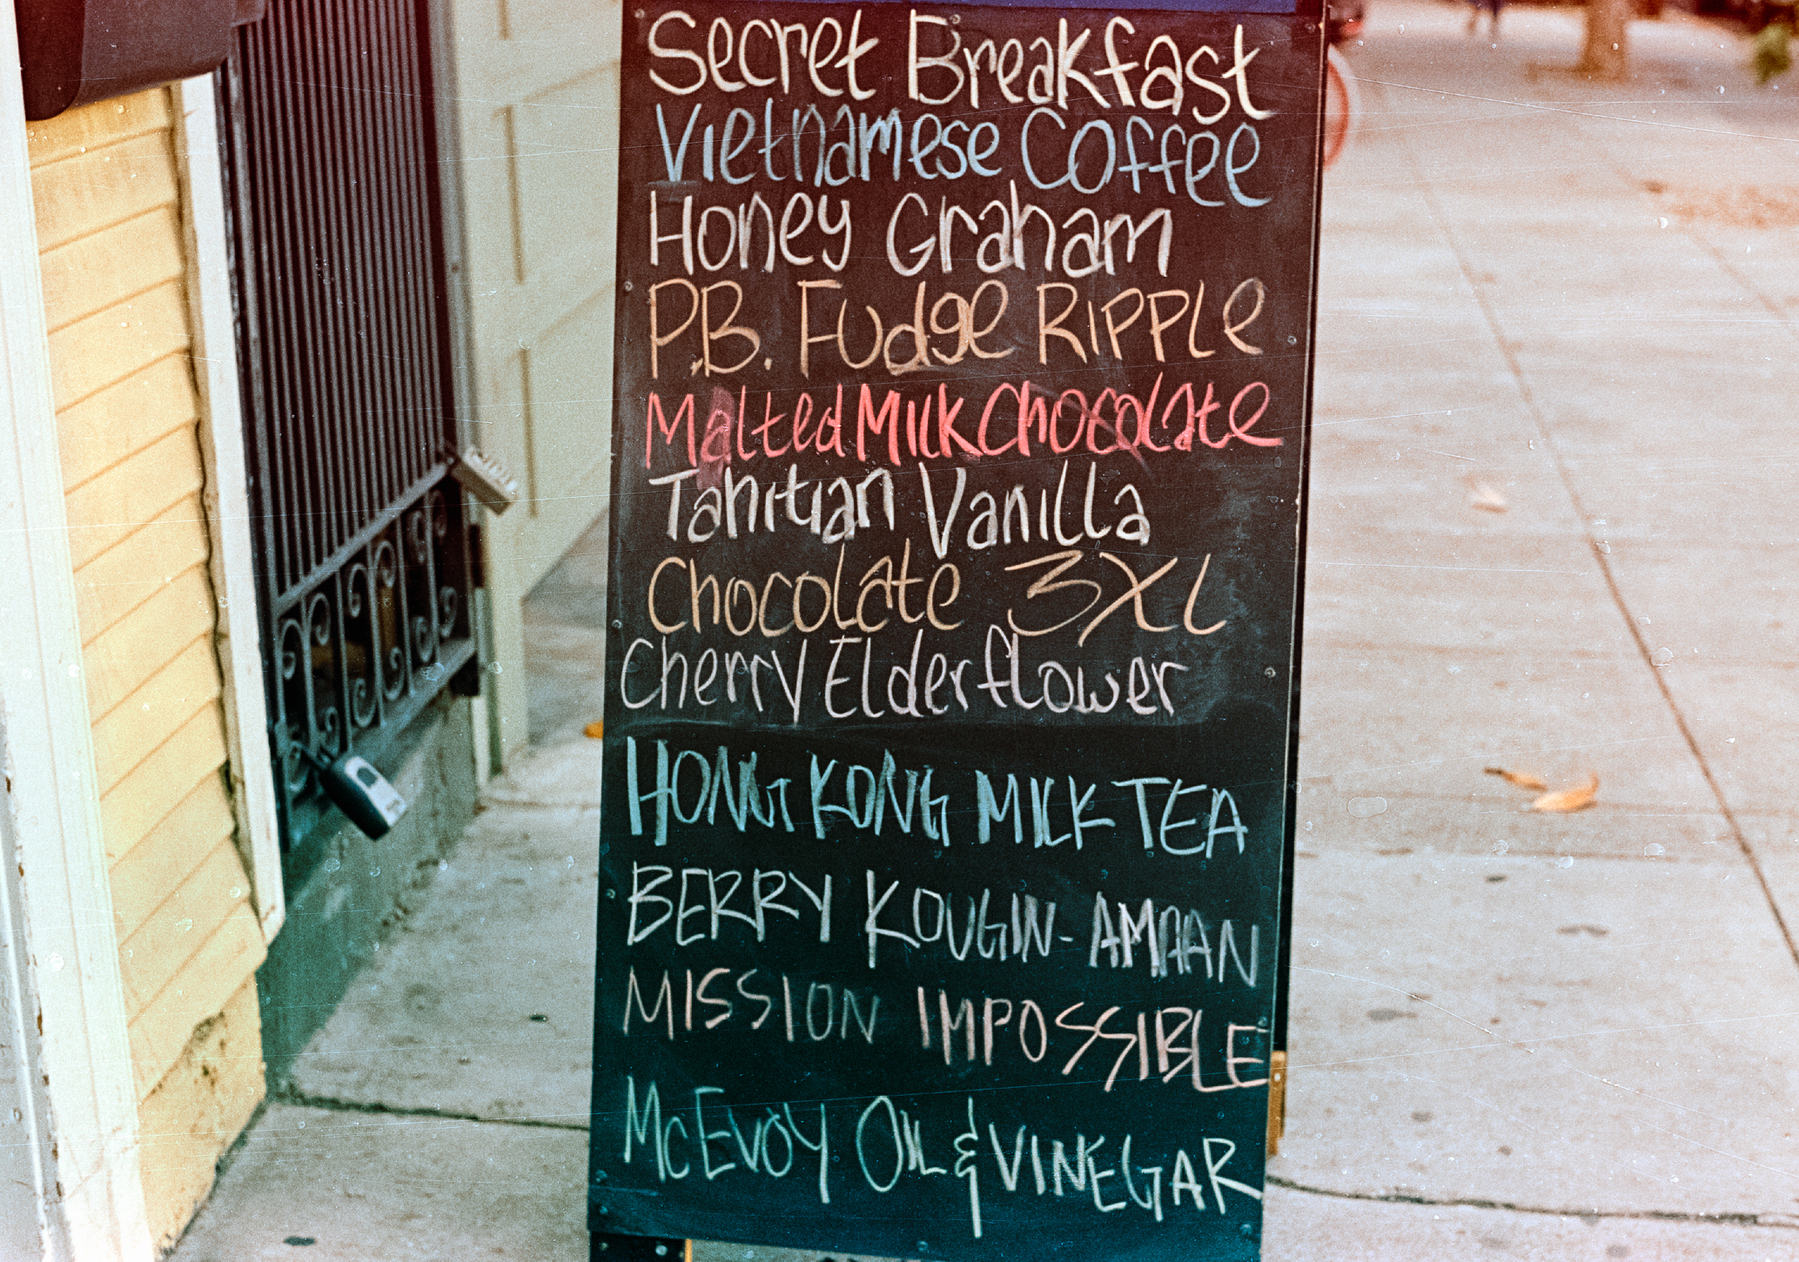 a scan of a color photo of ice cream flavors on a chalkboard in the Mission, with interesting flavors like vietnamese coffee and hong kong milk tea